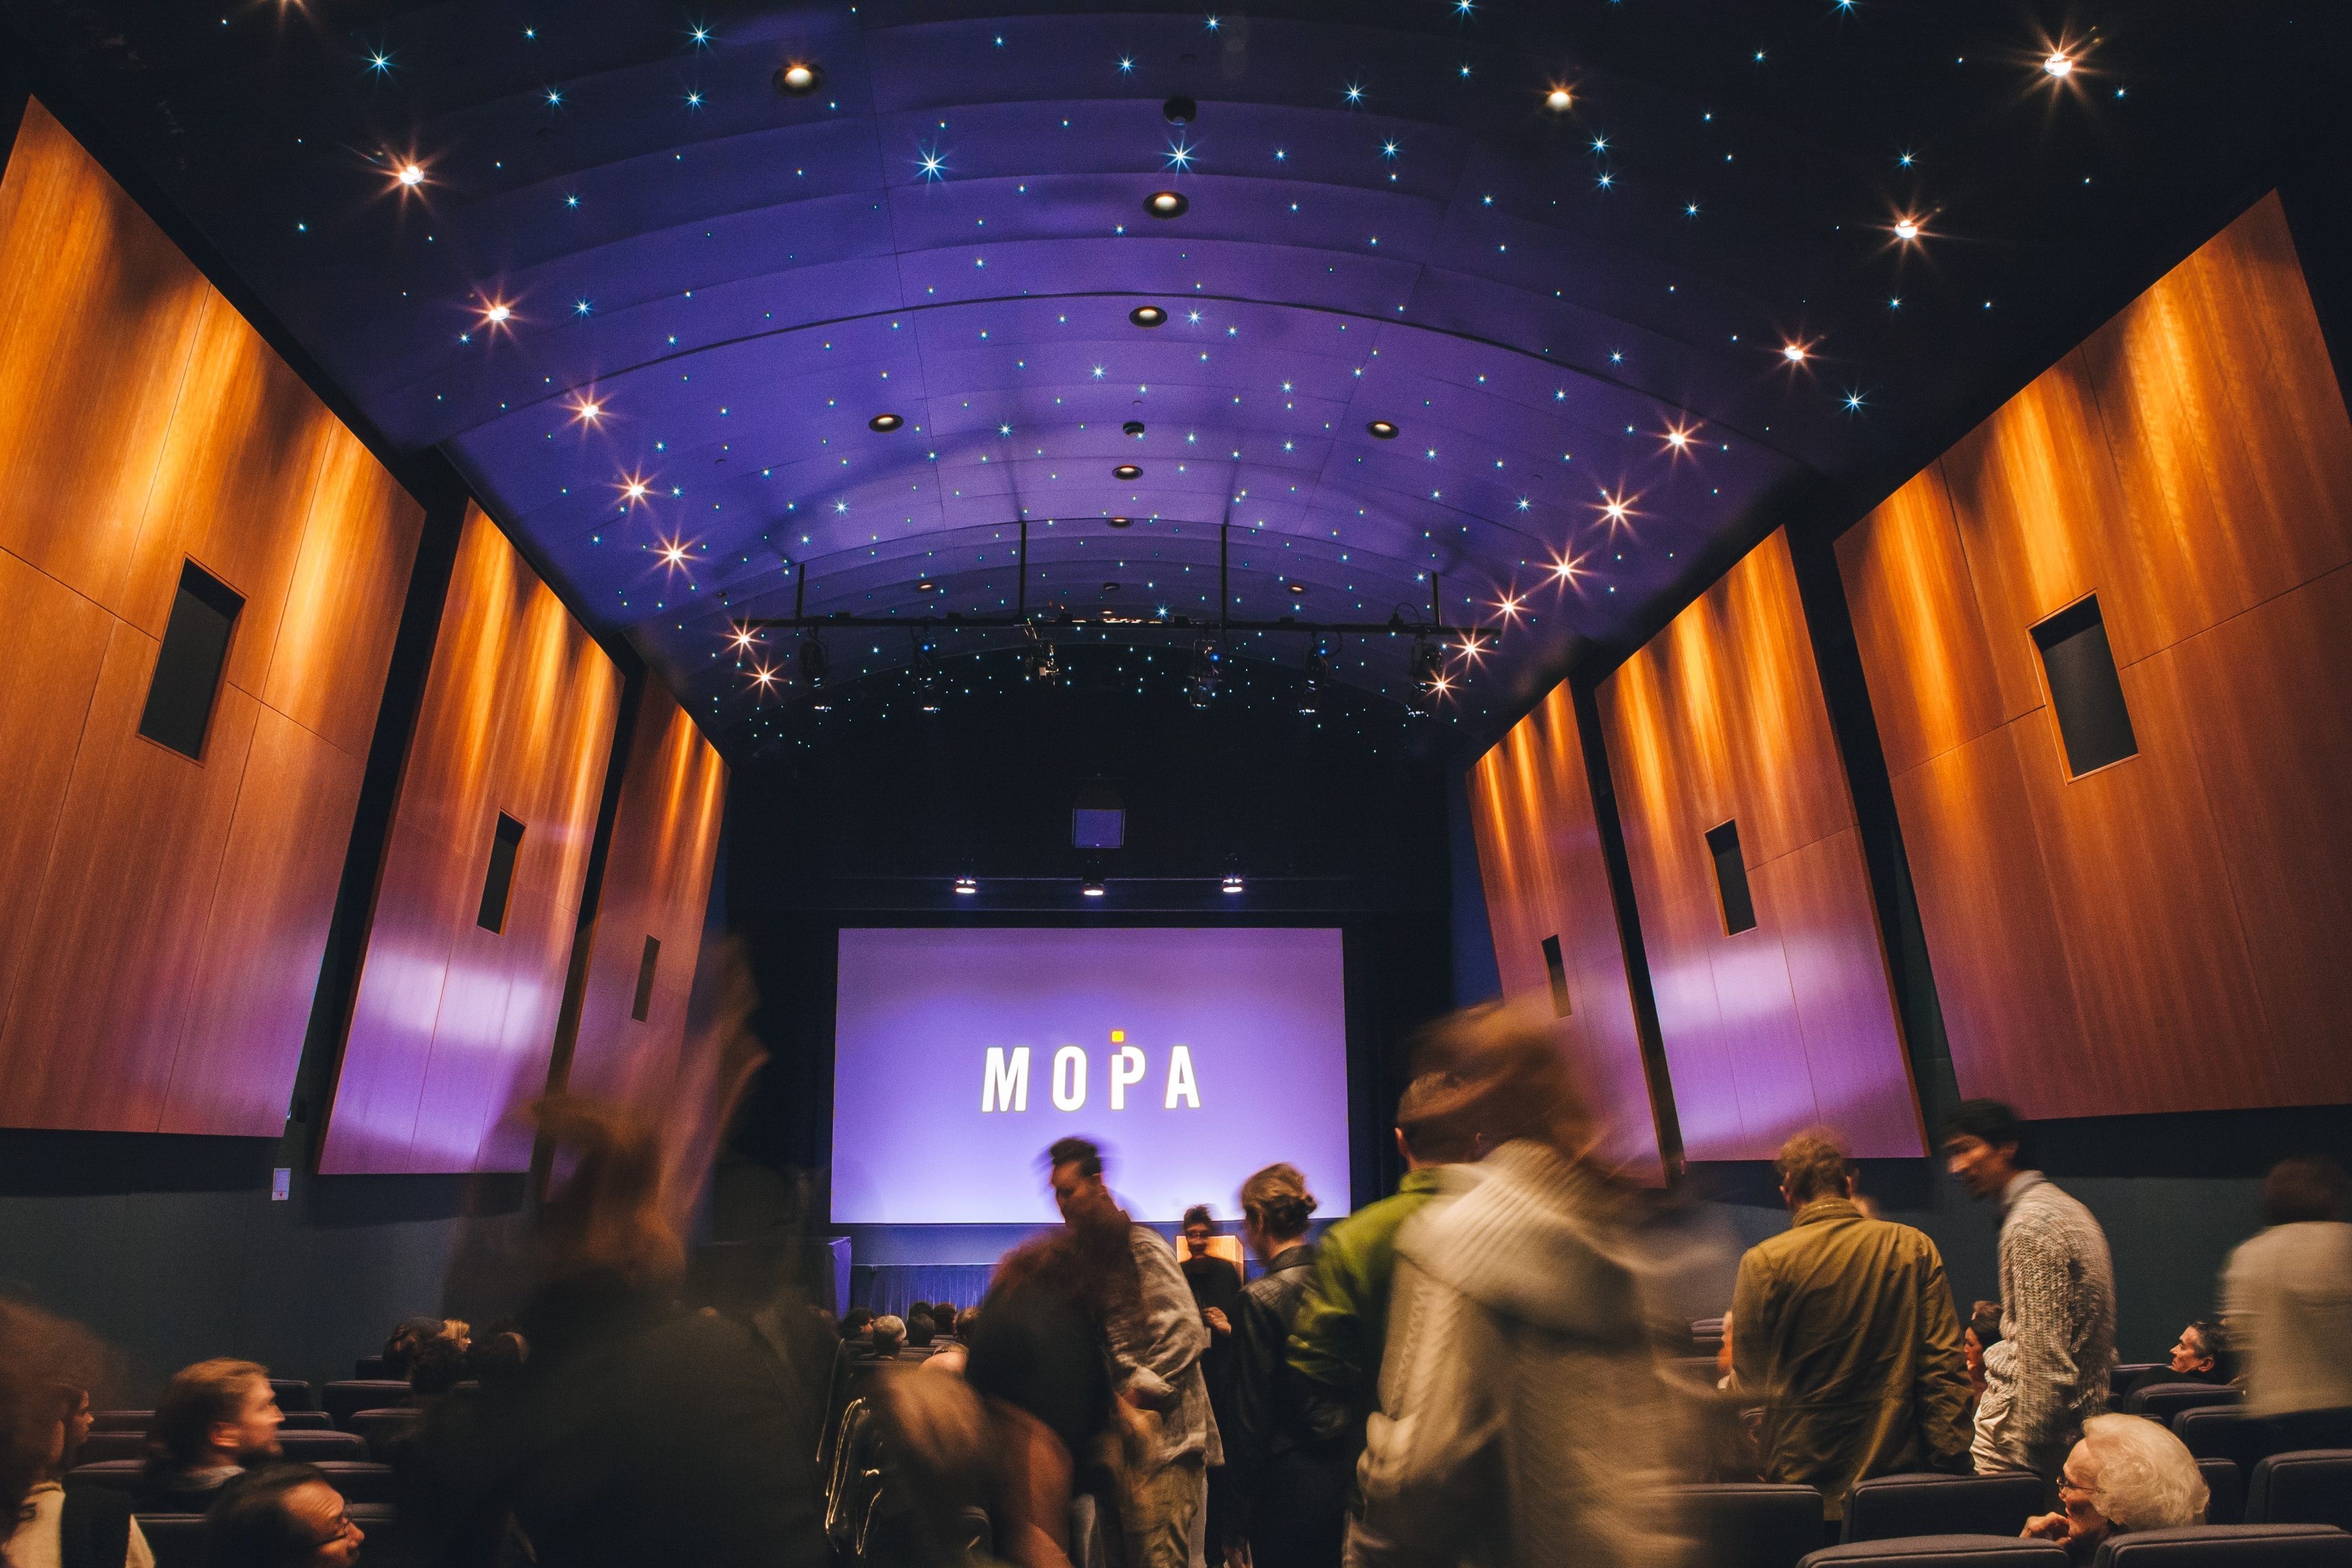 The Museum of Photographic Arts (MOPA) puts on regular film festivals and other landmark film showings. (Courtesy MOPA)